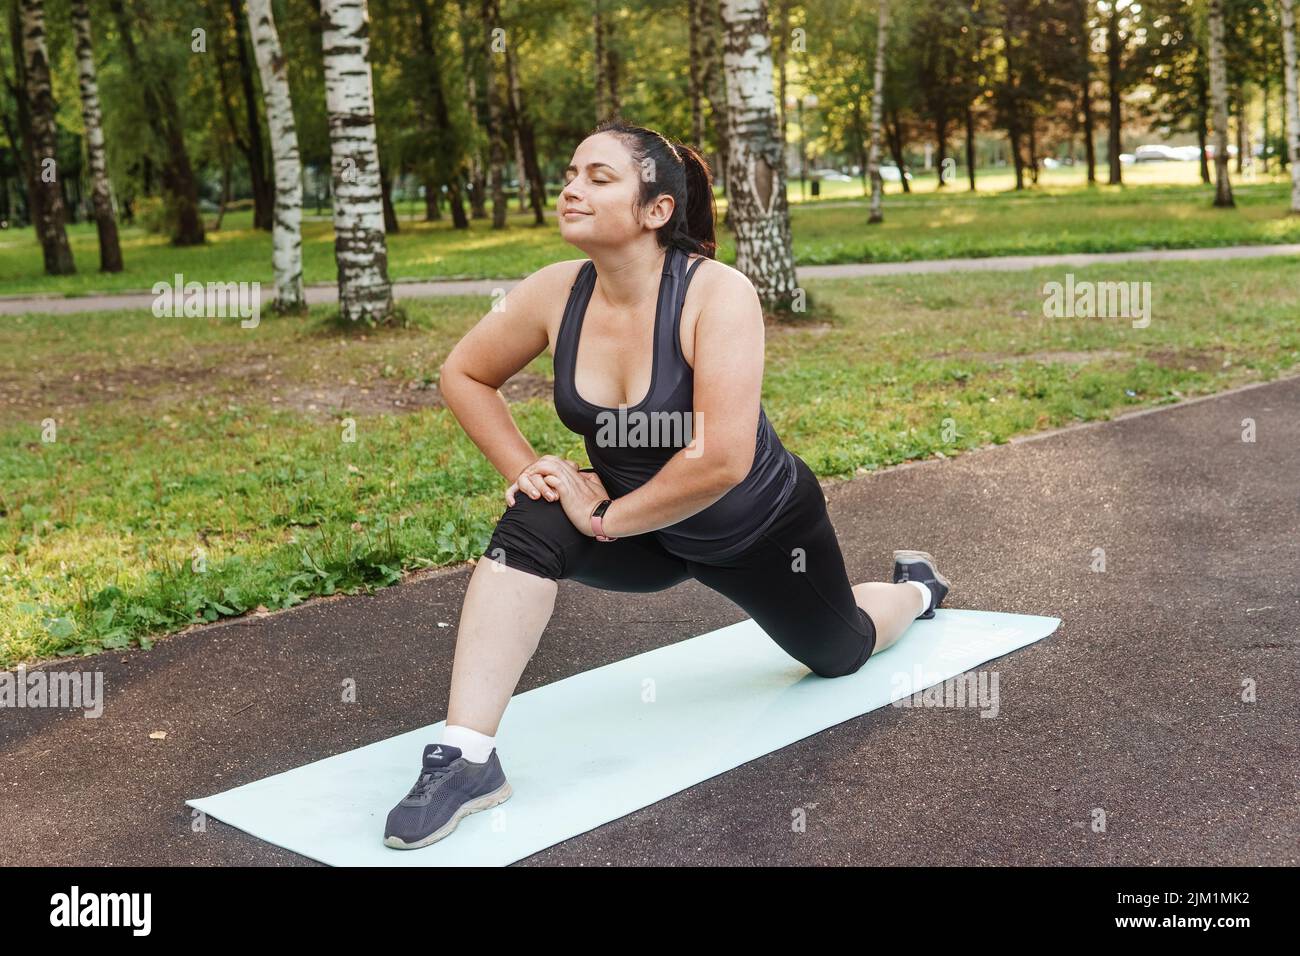 A charming brunette woman plus-size body positive practices sports in nature Stock Photo